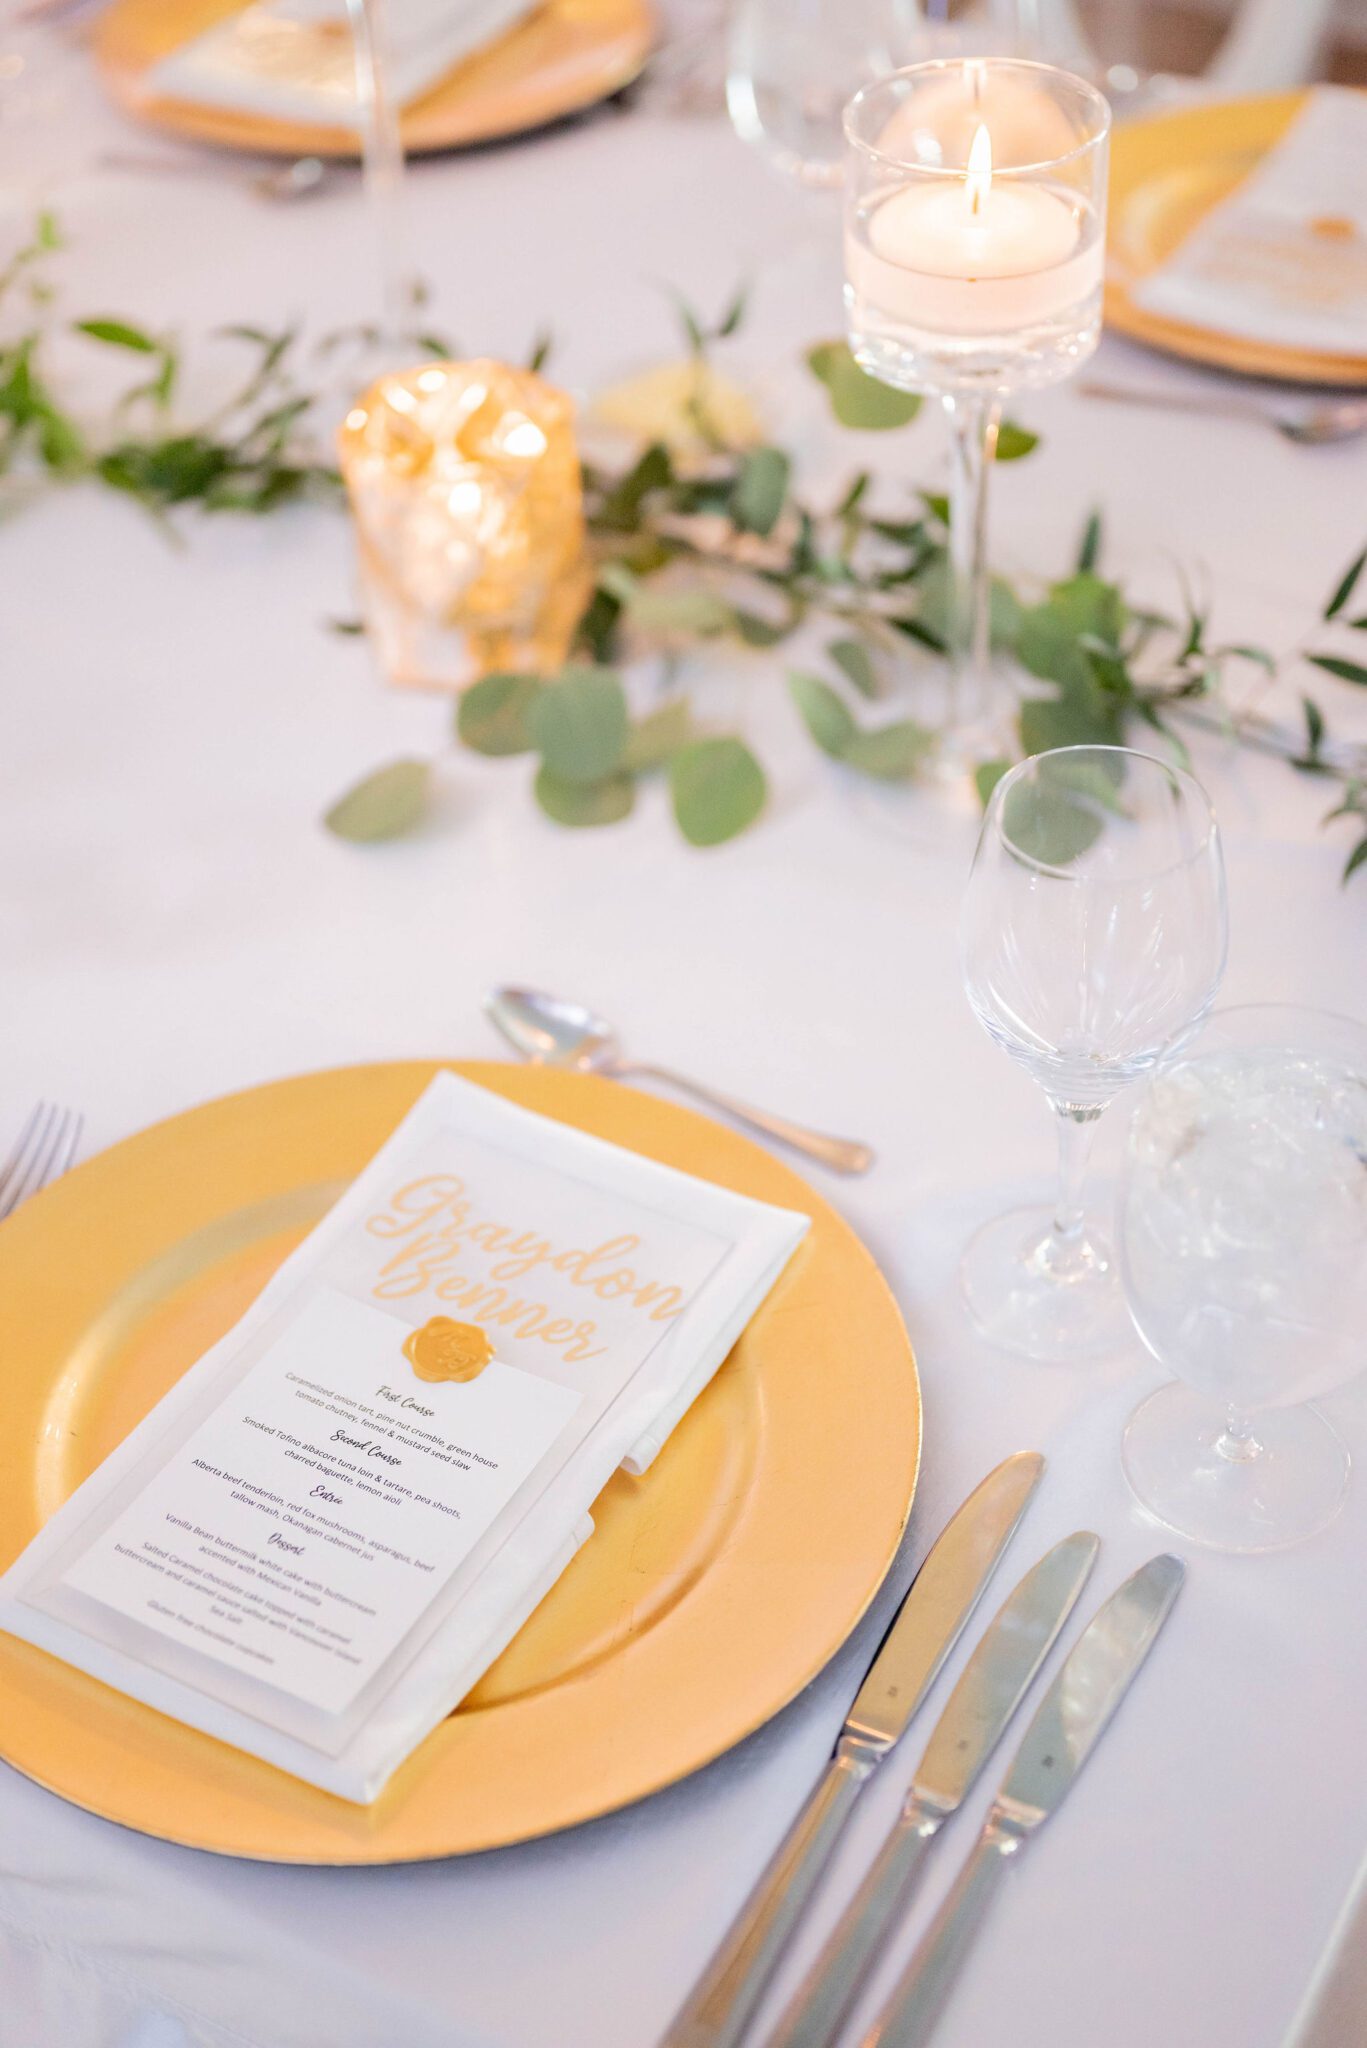 Classic wedding style with gold charger plates, custom menus for guests with gold handwriting, votive candles, and light greenery along the table. 